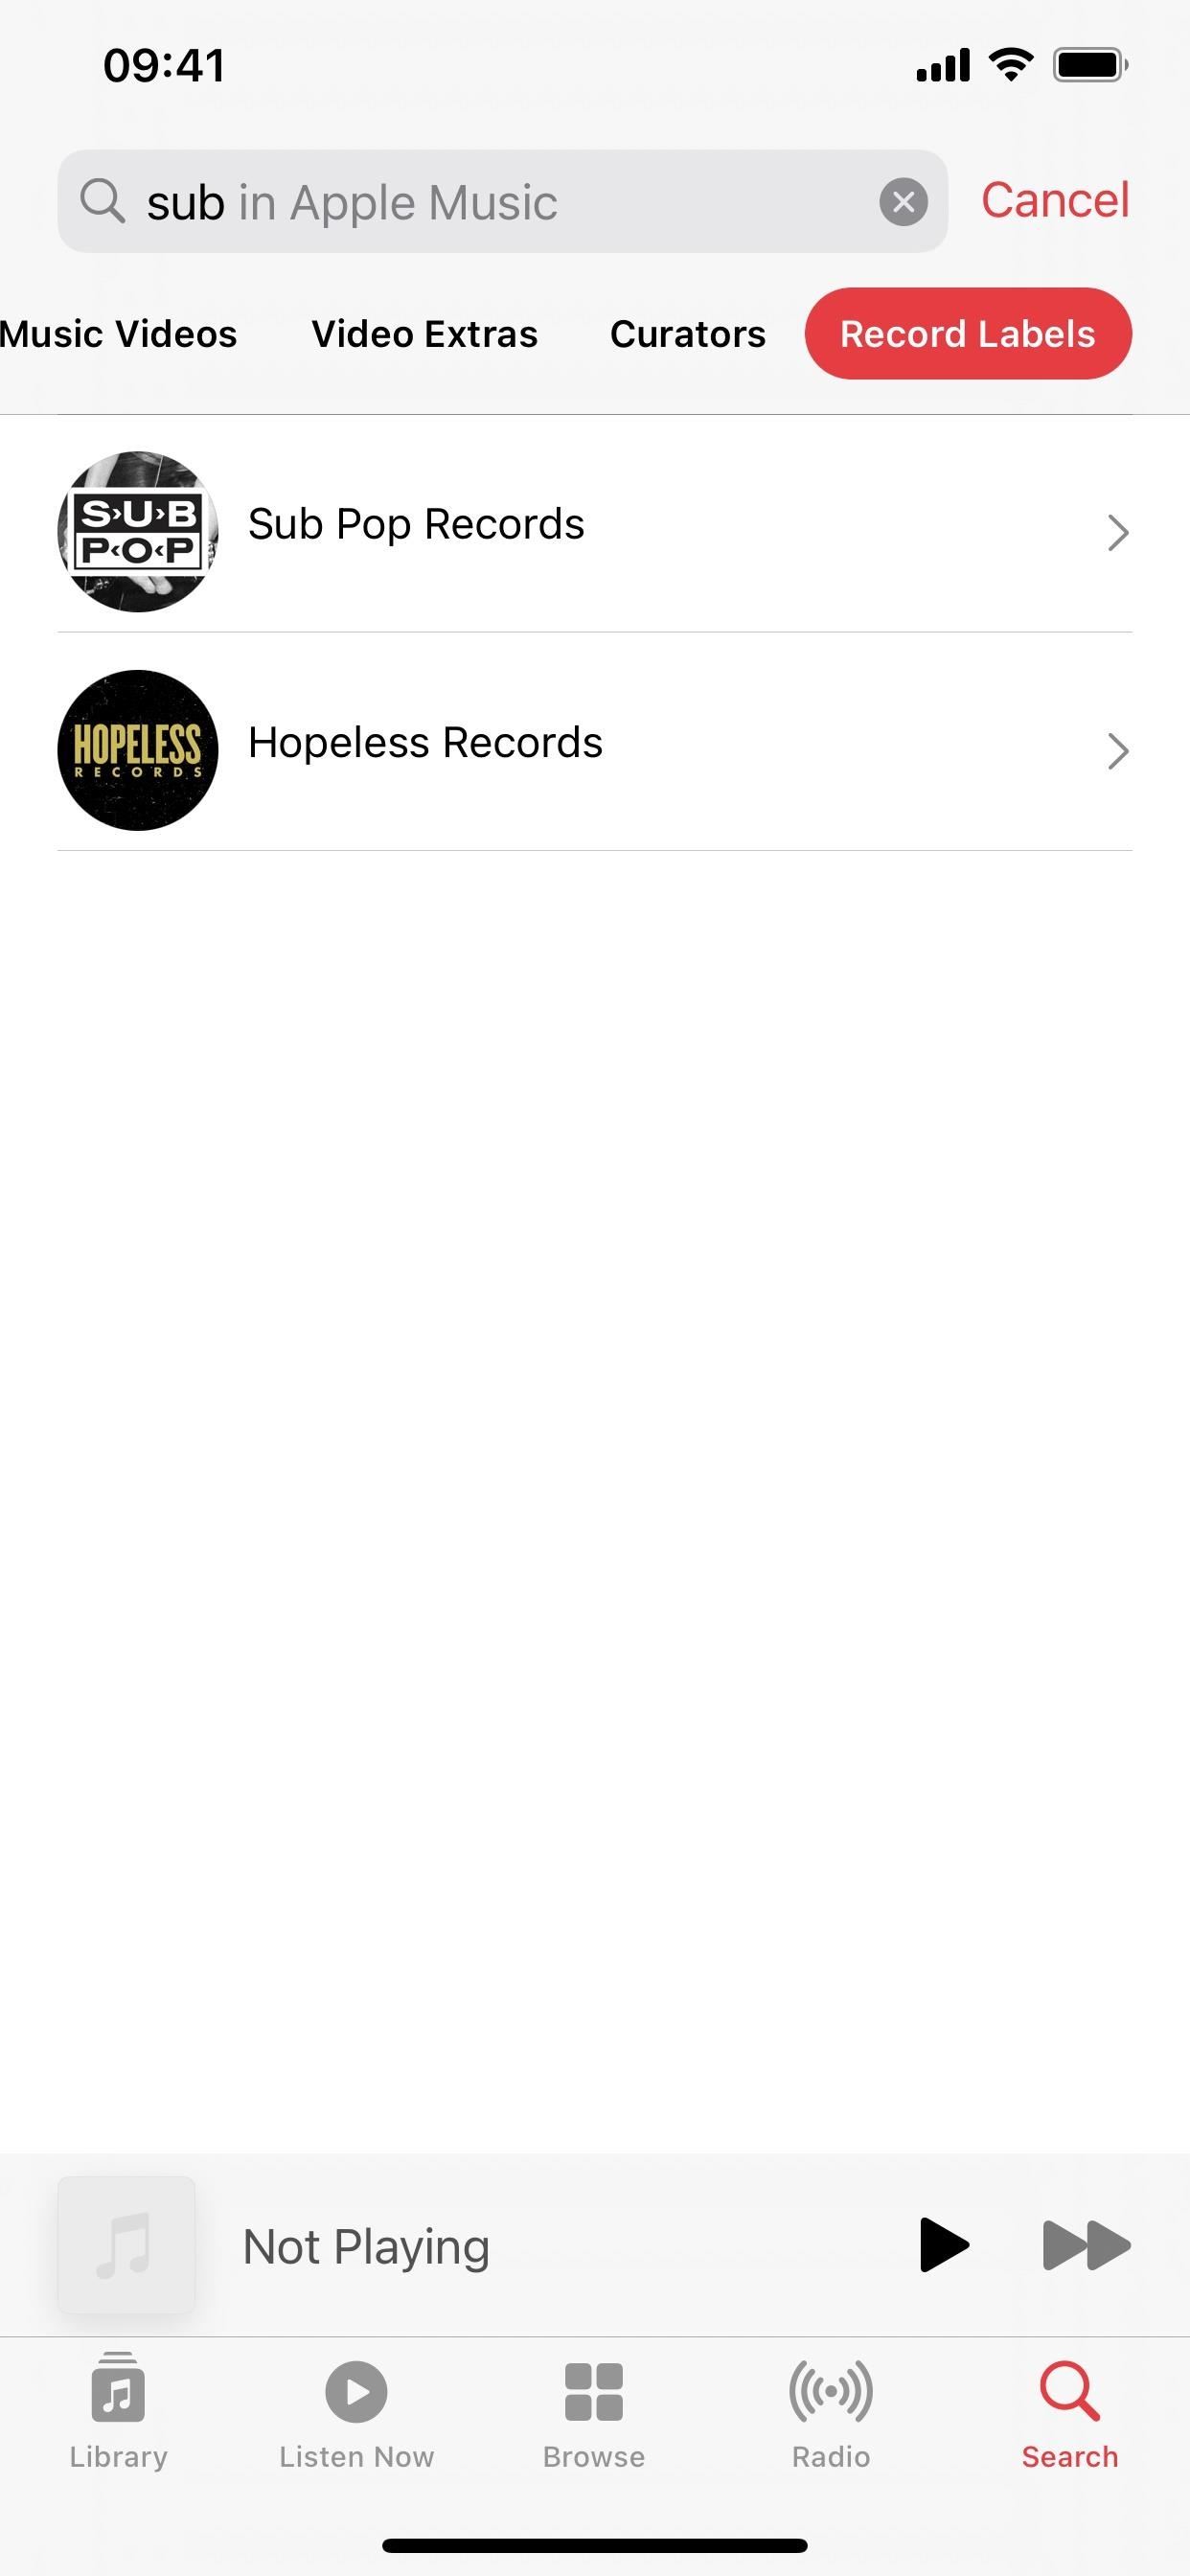 Search Apple Music by Record Label to Find Like-Minded Artists & Albums